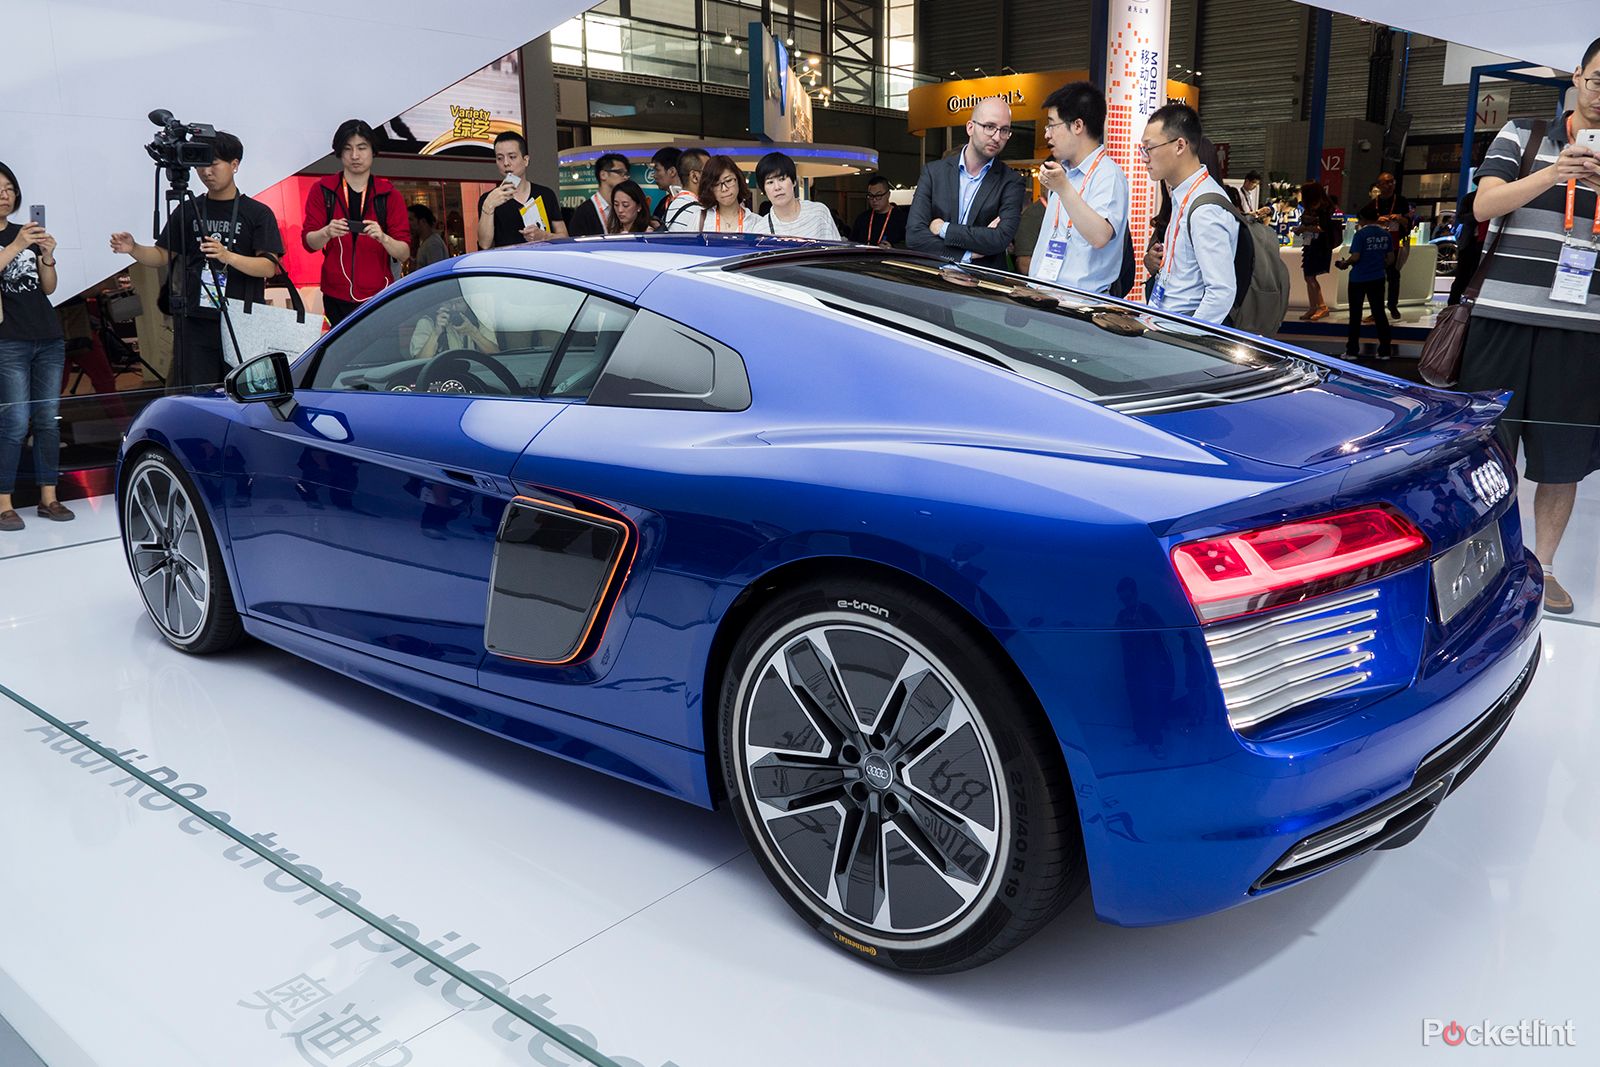 audi r8 e tron in pictures the all electric driverless supercar of the future image 5